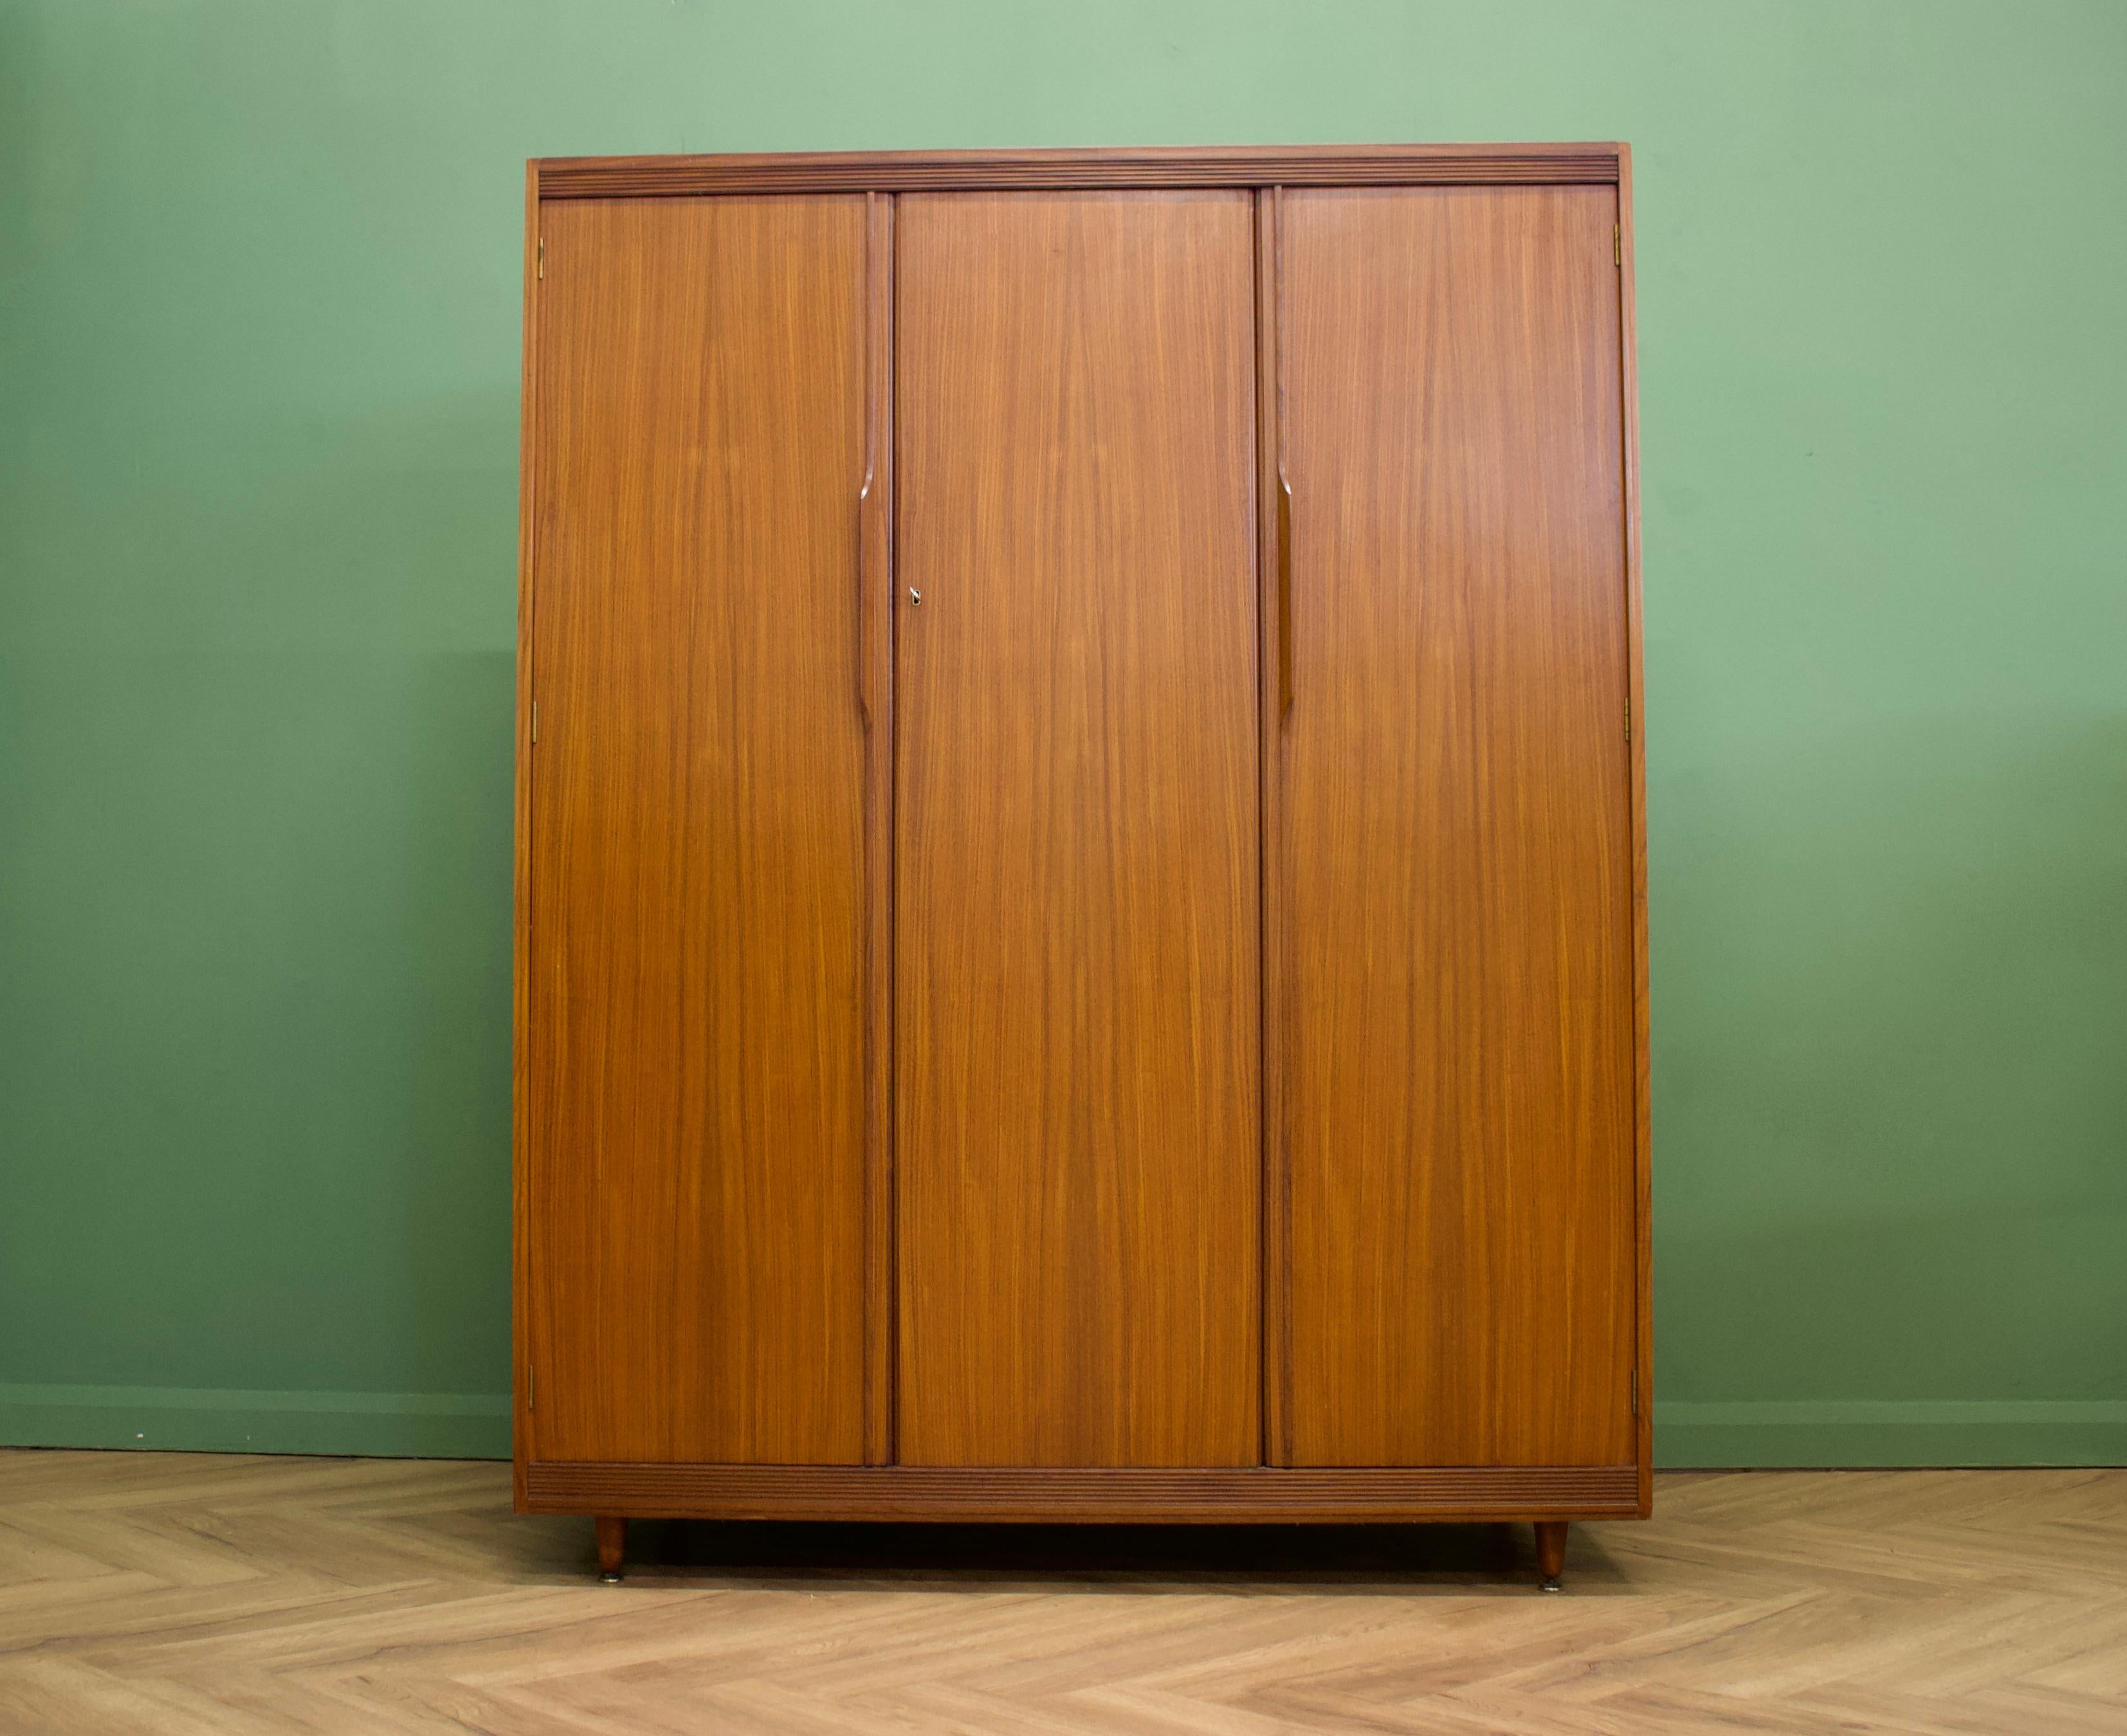 Mid-Century Modern wardrobe.
Manufactured by White and Newton in the UK.
Made from teak & teak veneer.
Featuring two compartments with hanging rails to each.